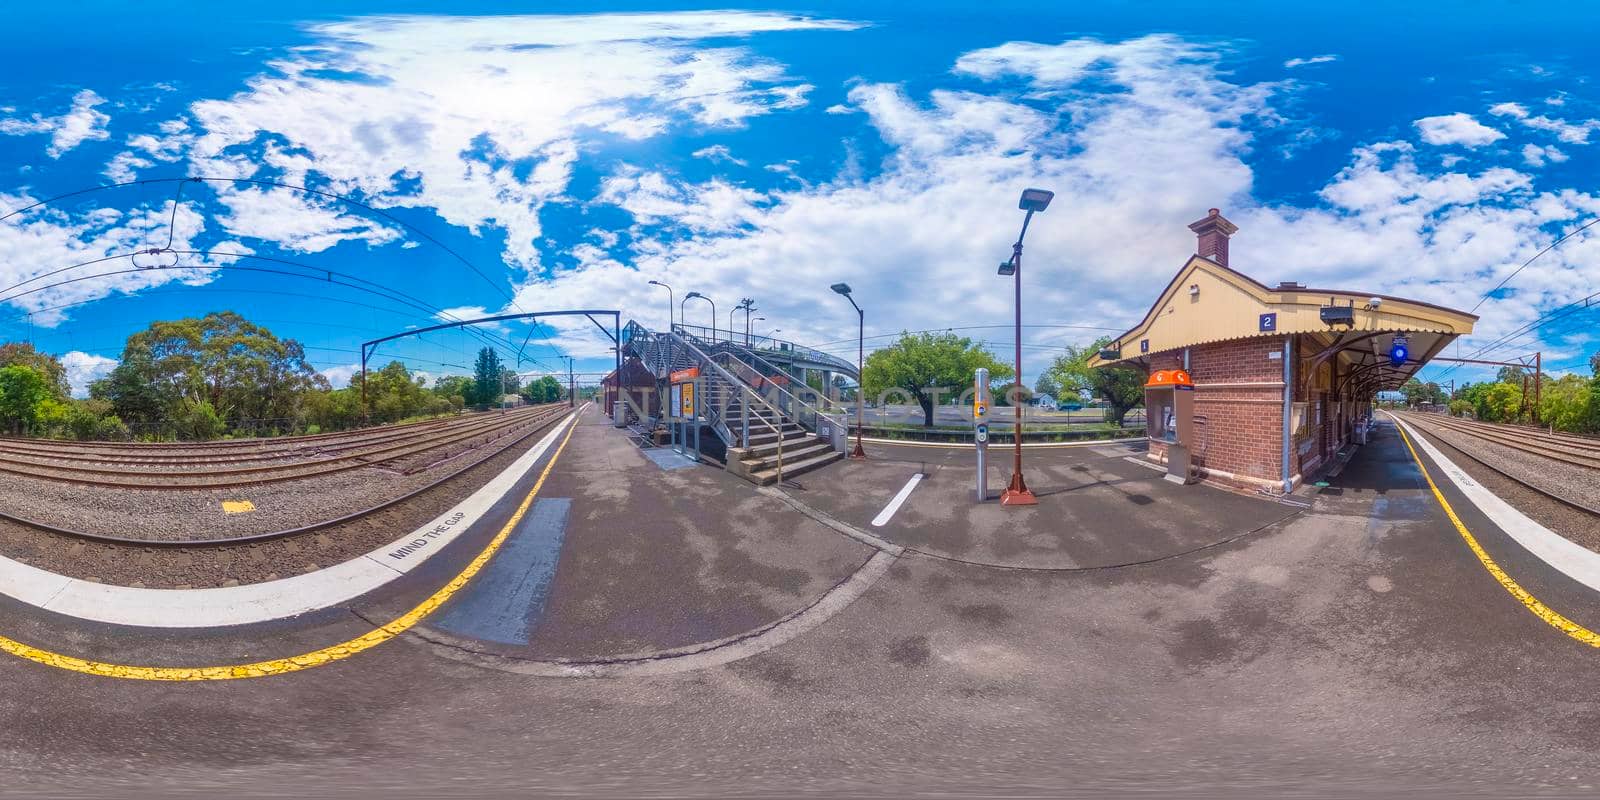 Spherical 360 panorama photograph of the Valley Heights Train Station by WittkePhotos